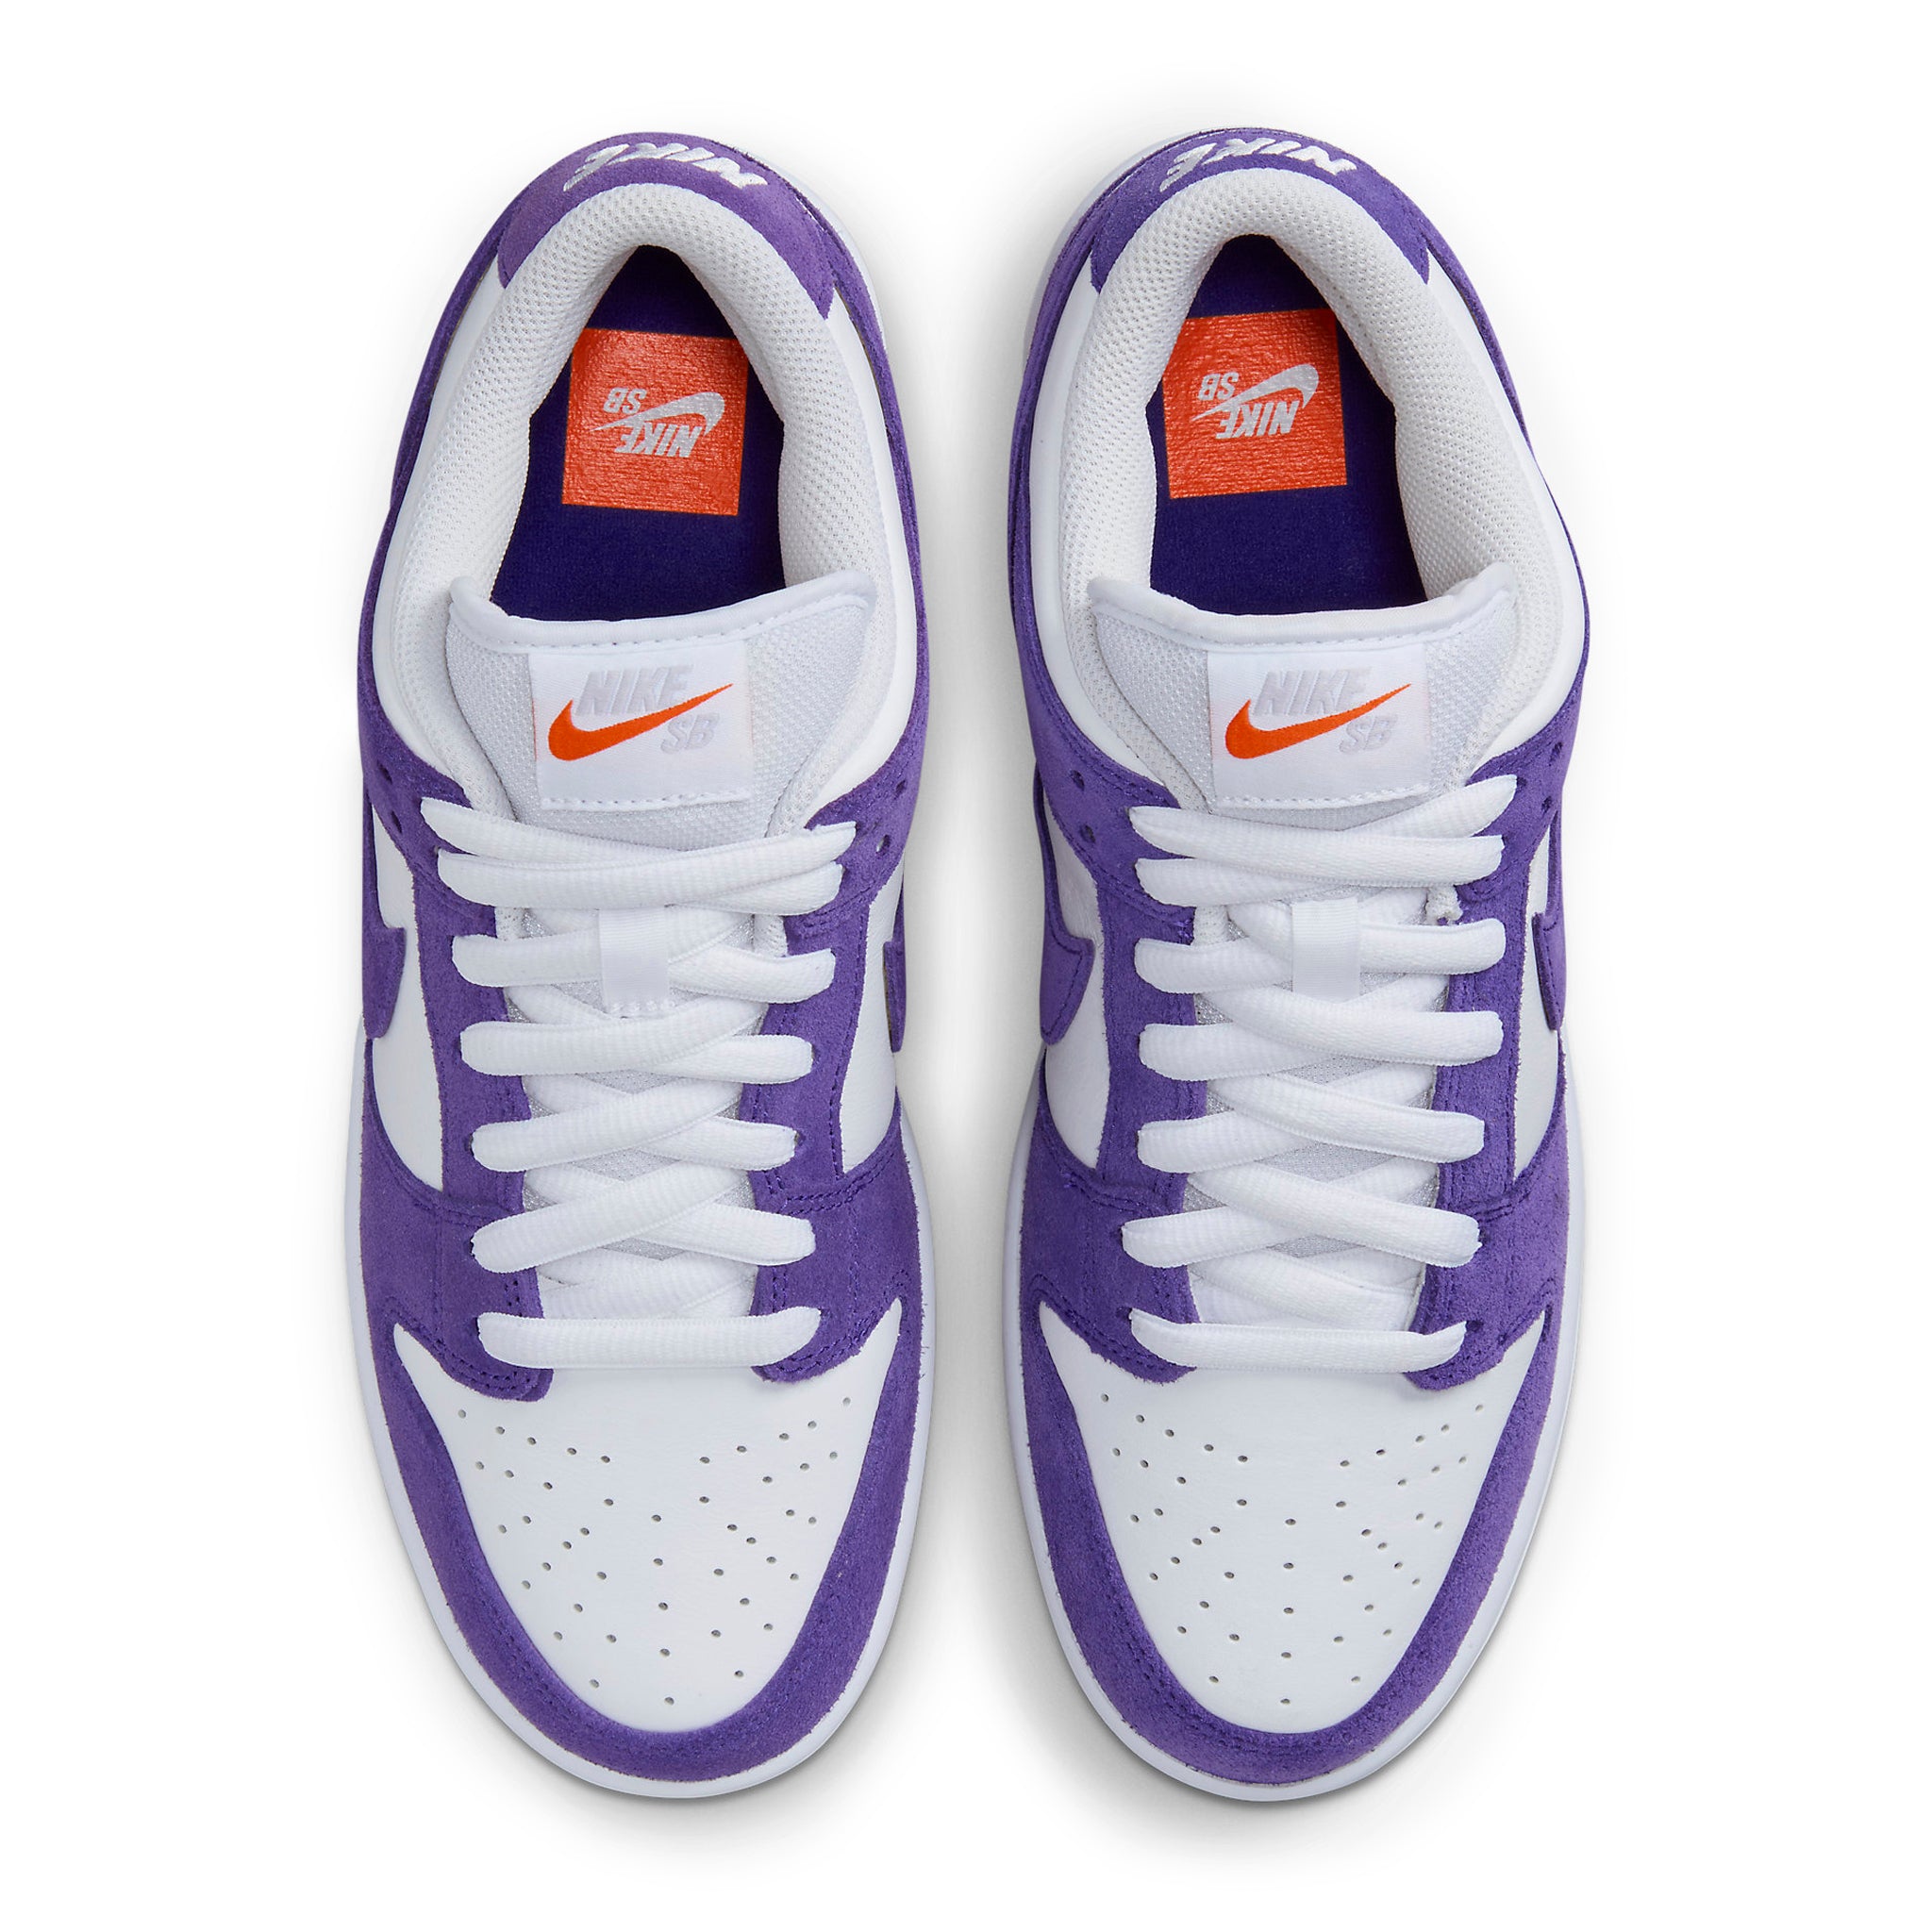 Top view of Side view of Nike SB Dunk Low Pro ISO Orange Label Court Purple DV5464-500 \